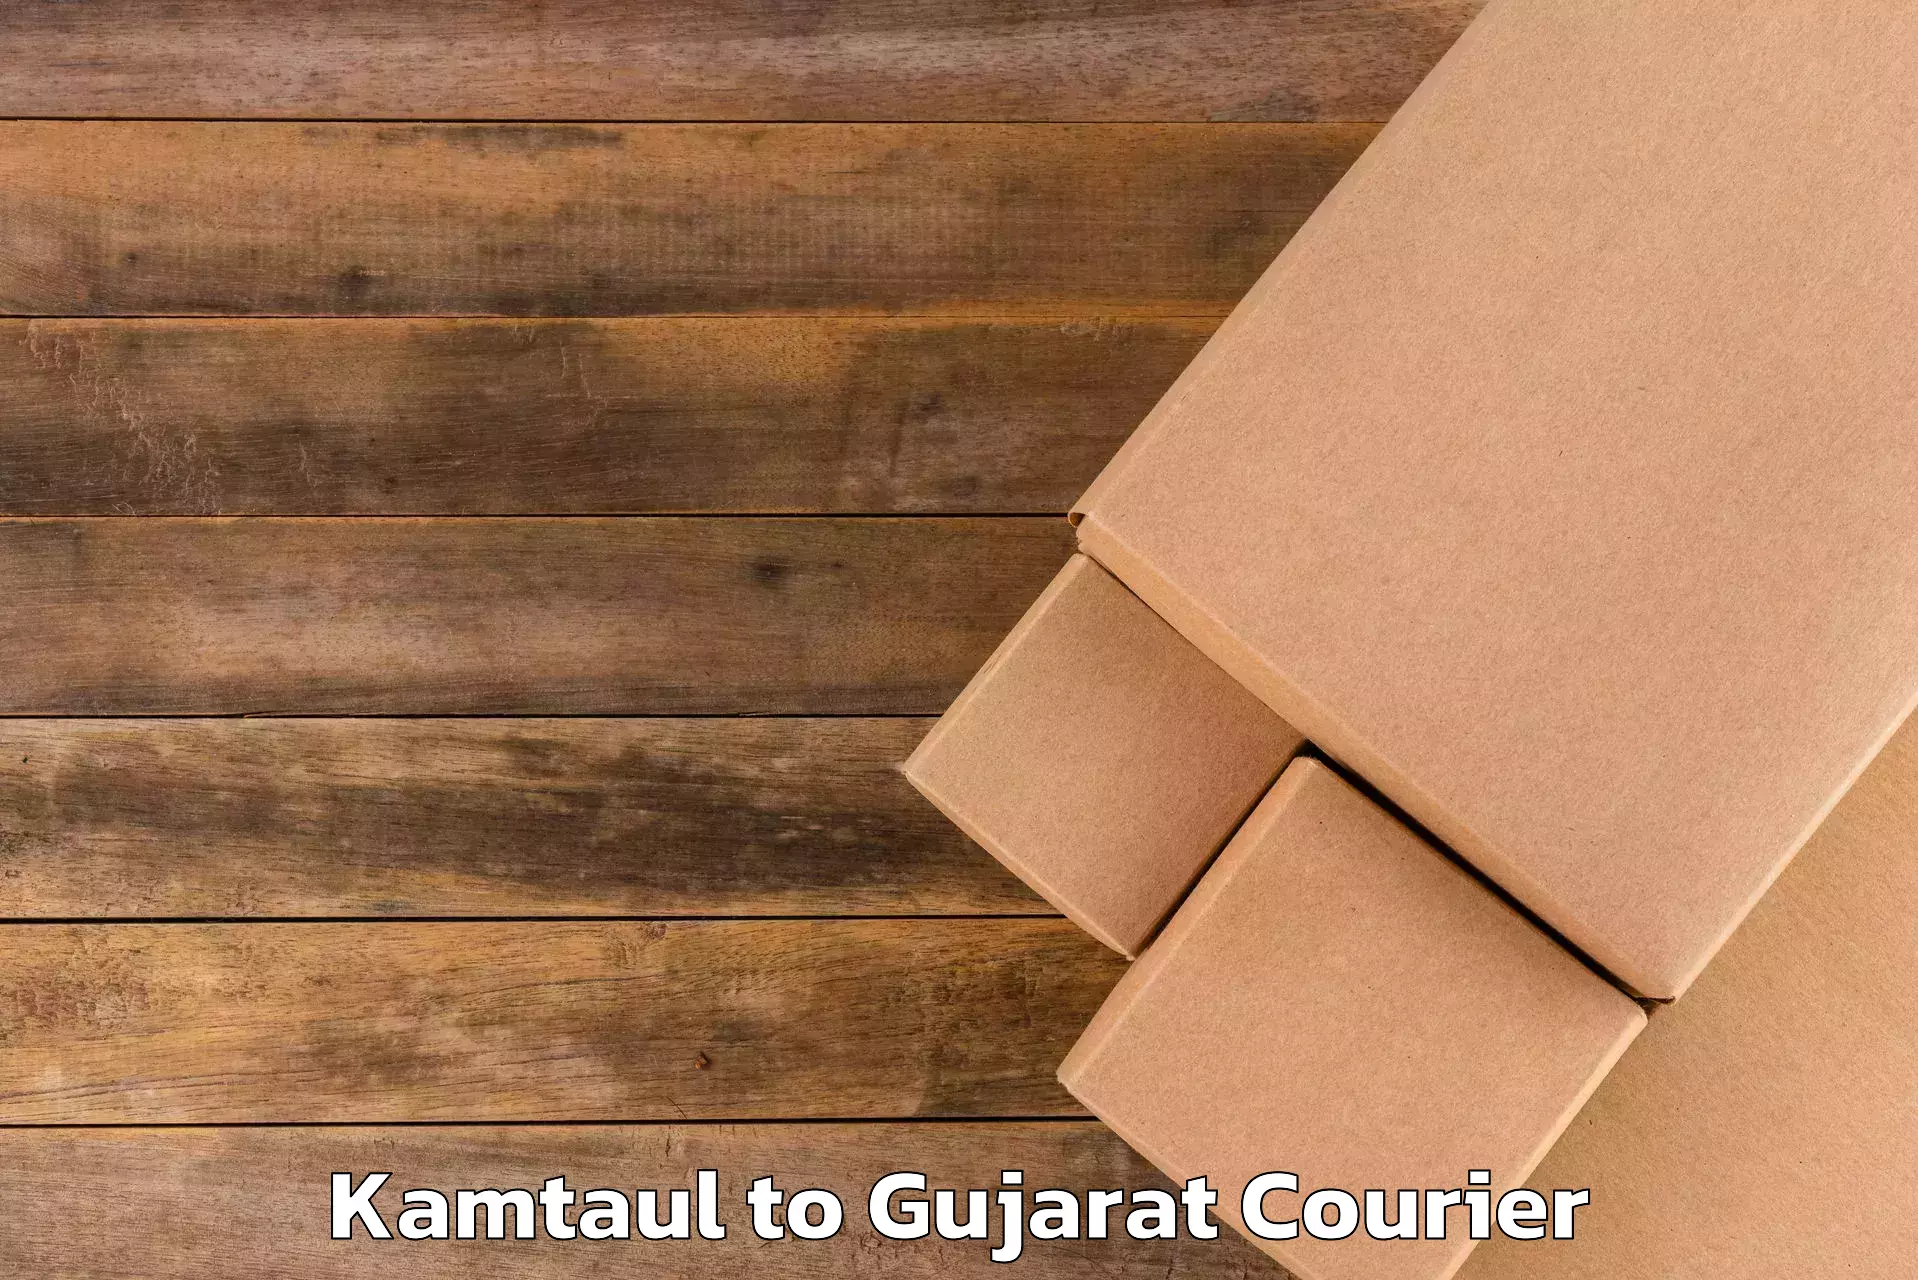 Instant baggage transport quote Kamtaul to Gujarat